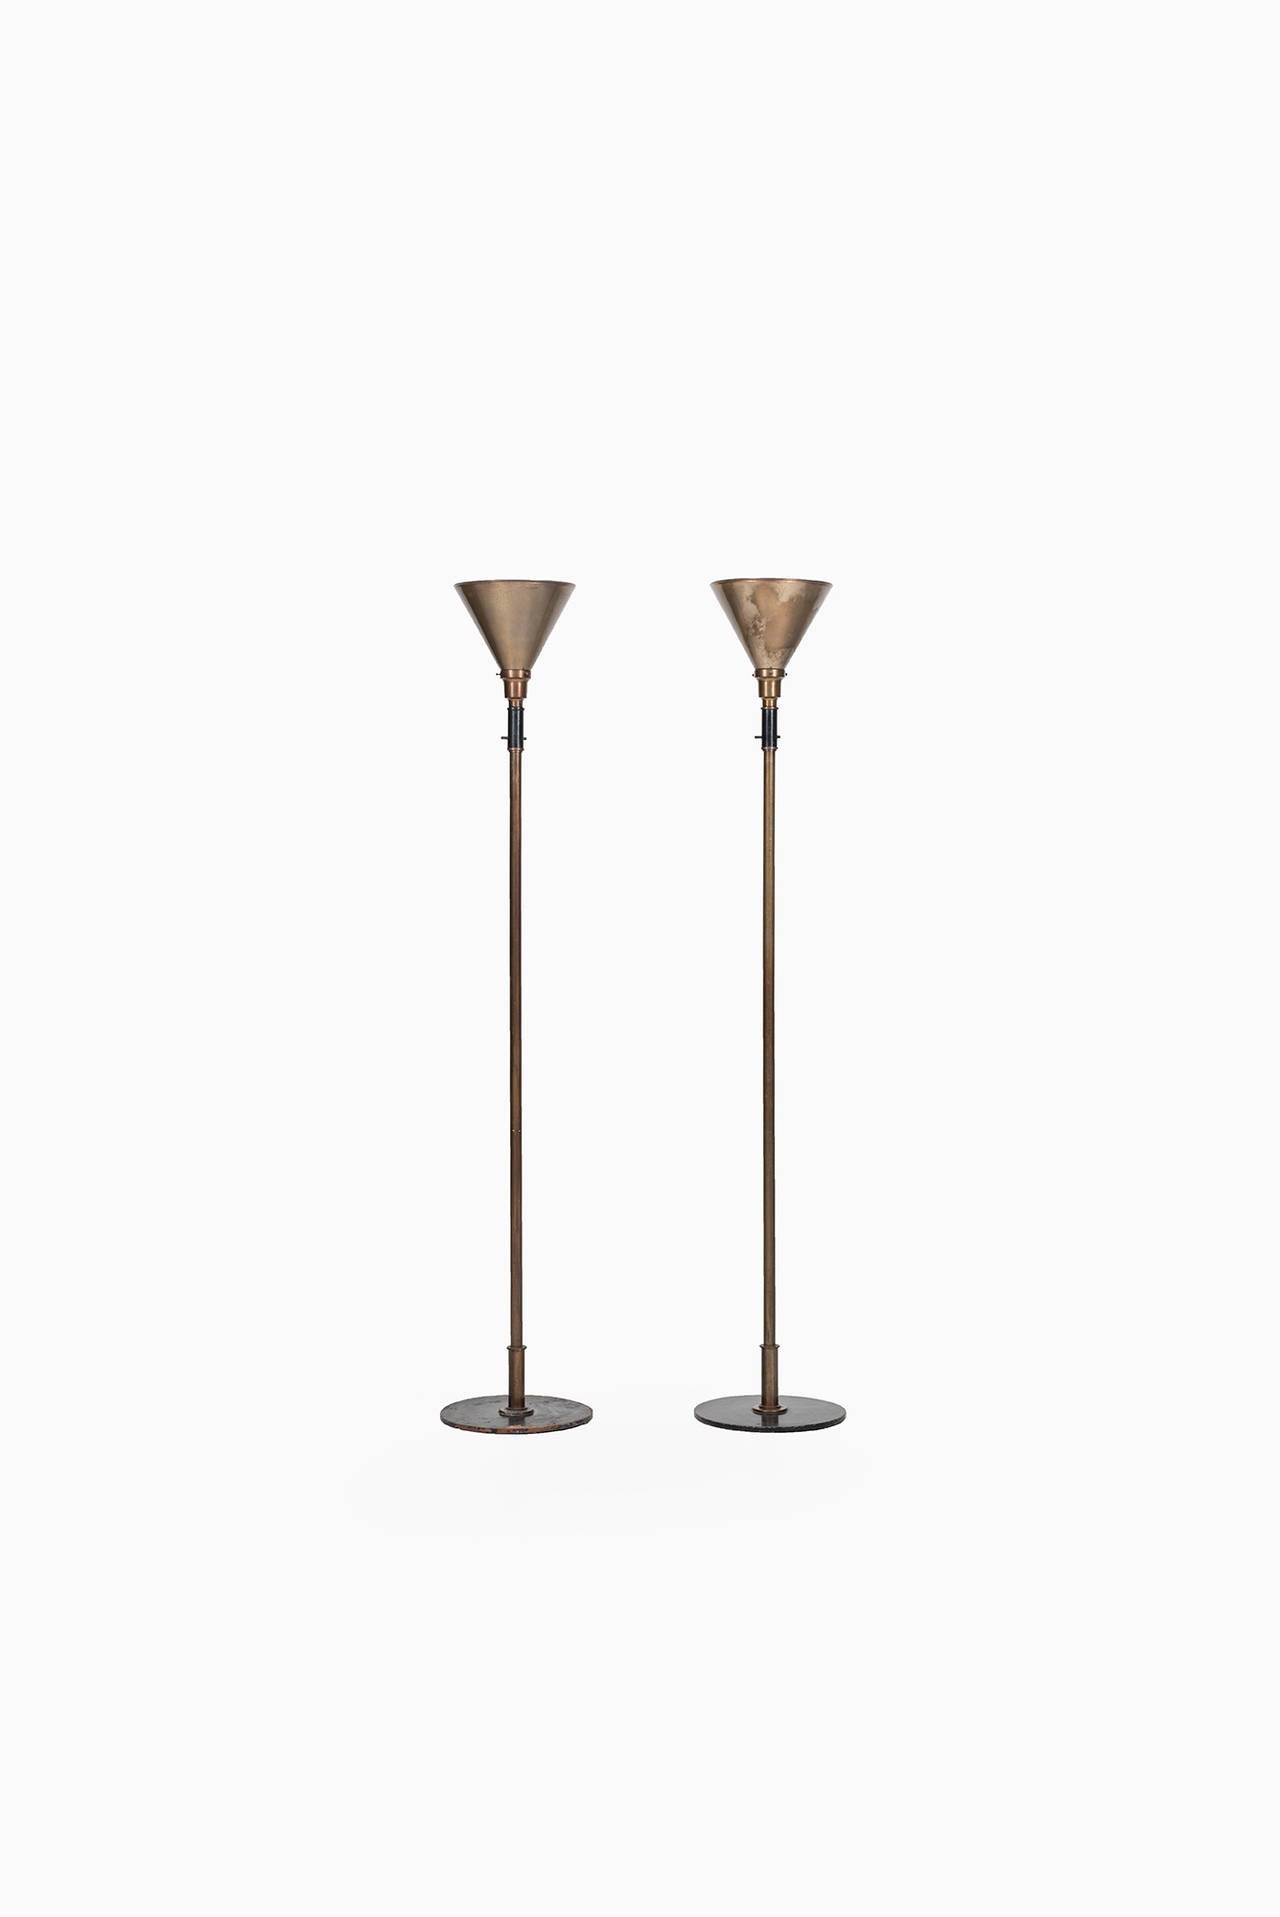 Mid-Century Modern Rare Pair of Floor Lamps or Uplights from 1930s by Fog & Mørup in Denmark